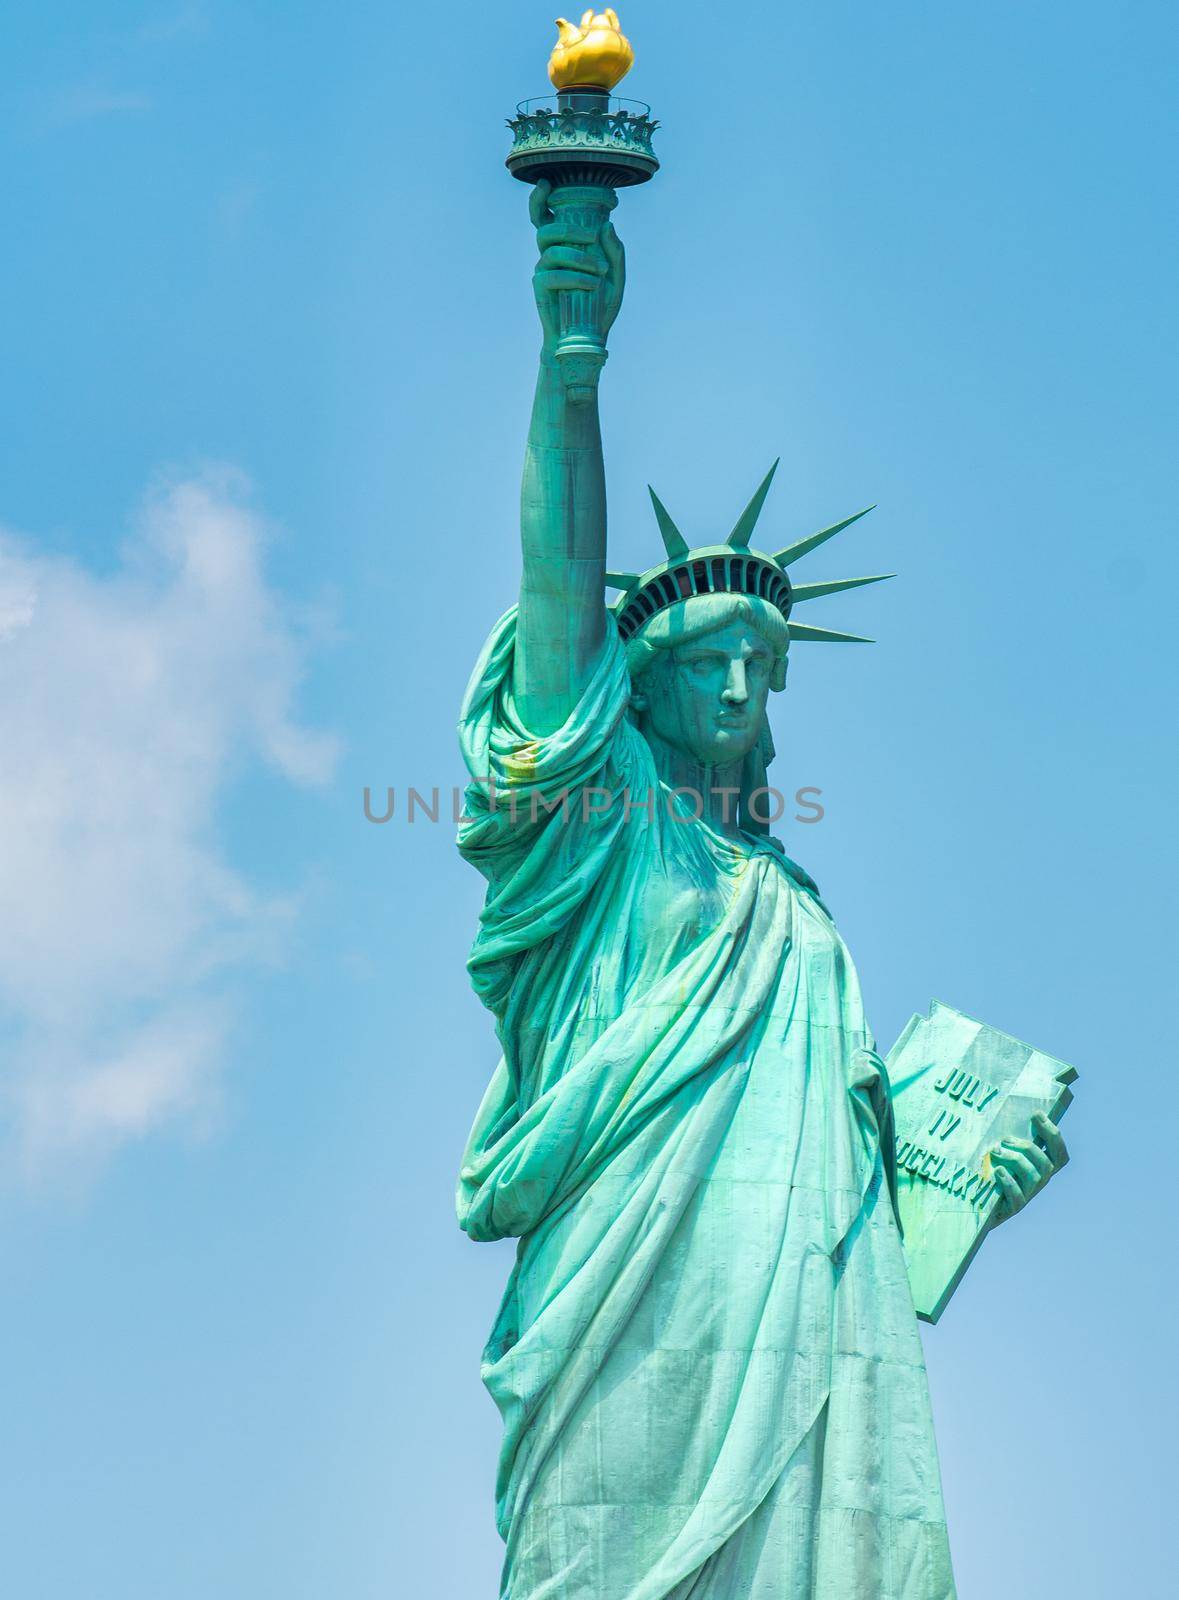 Amazing view of Statue of Liberty from the ferry boat by jovannig